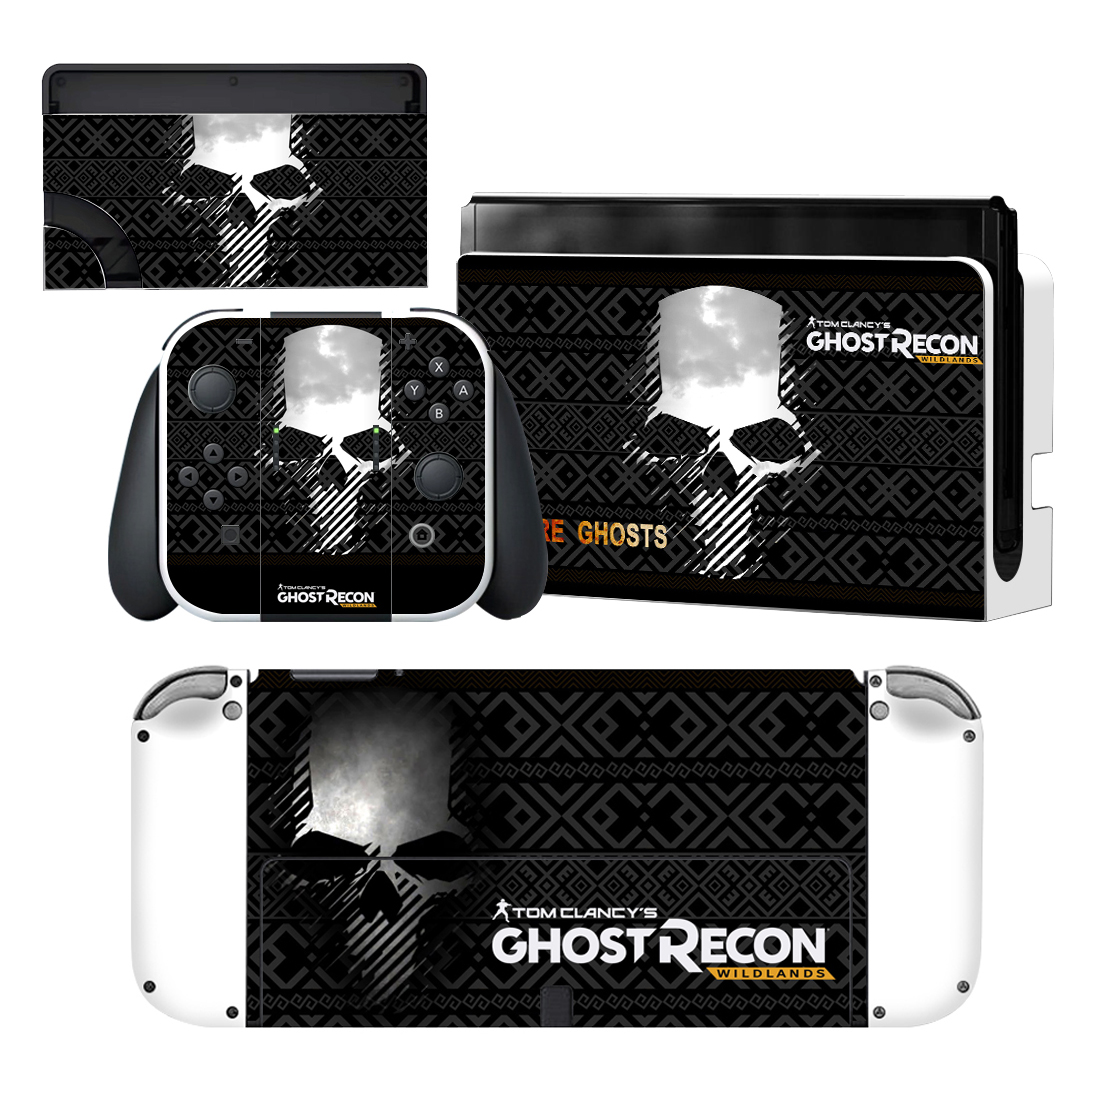 Ghost Recon Skin Sticker For Nintendo Switch OLED Design 1